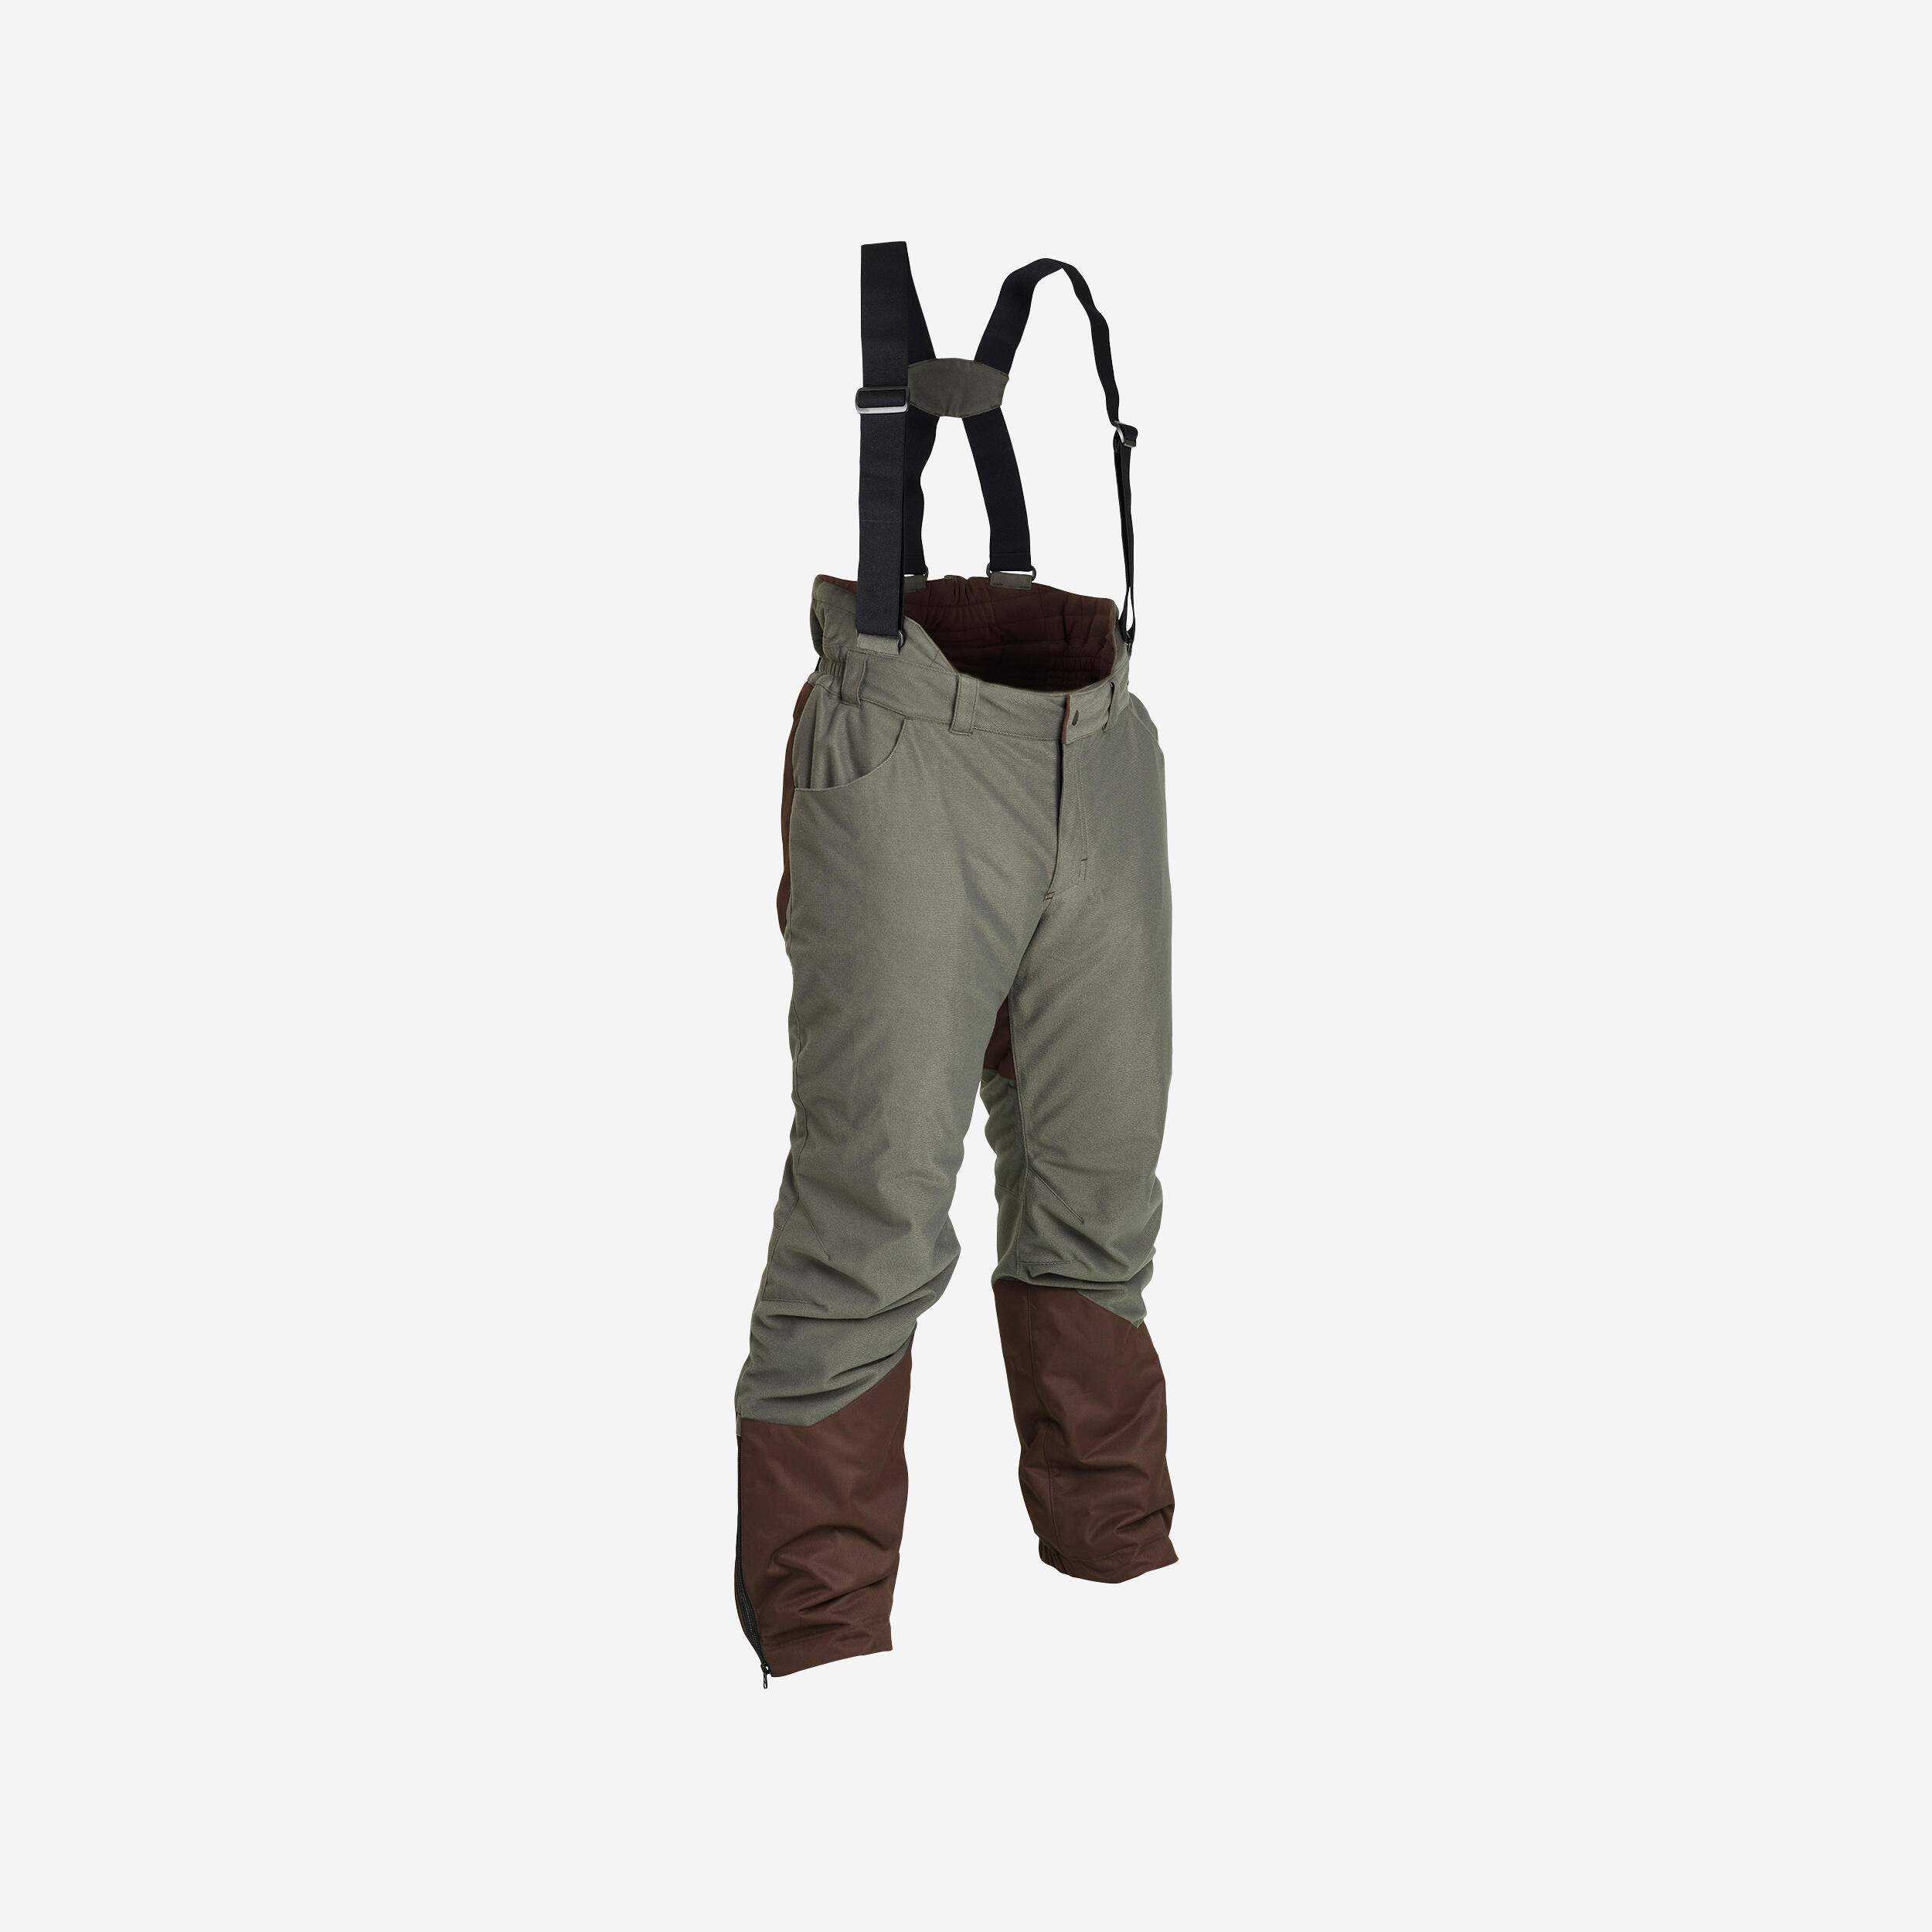 Men's Country Sport Lightweight Breathable Trousers - 500 Beige - Decathlon